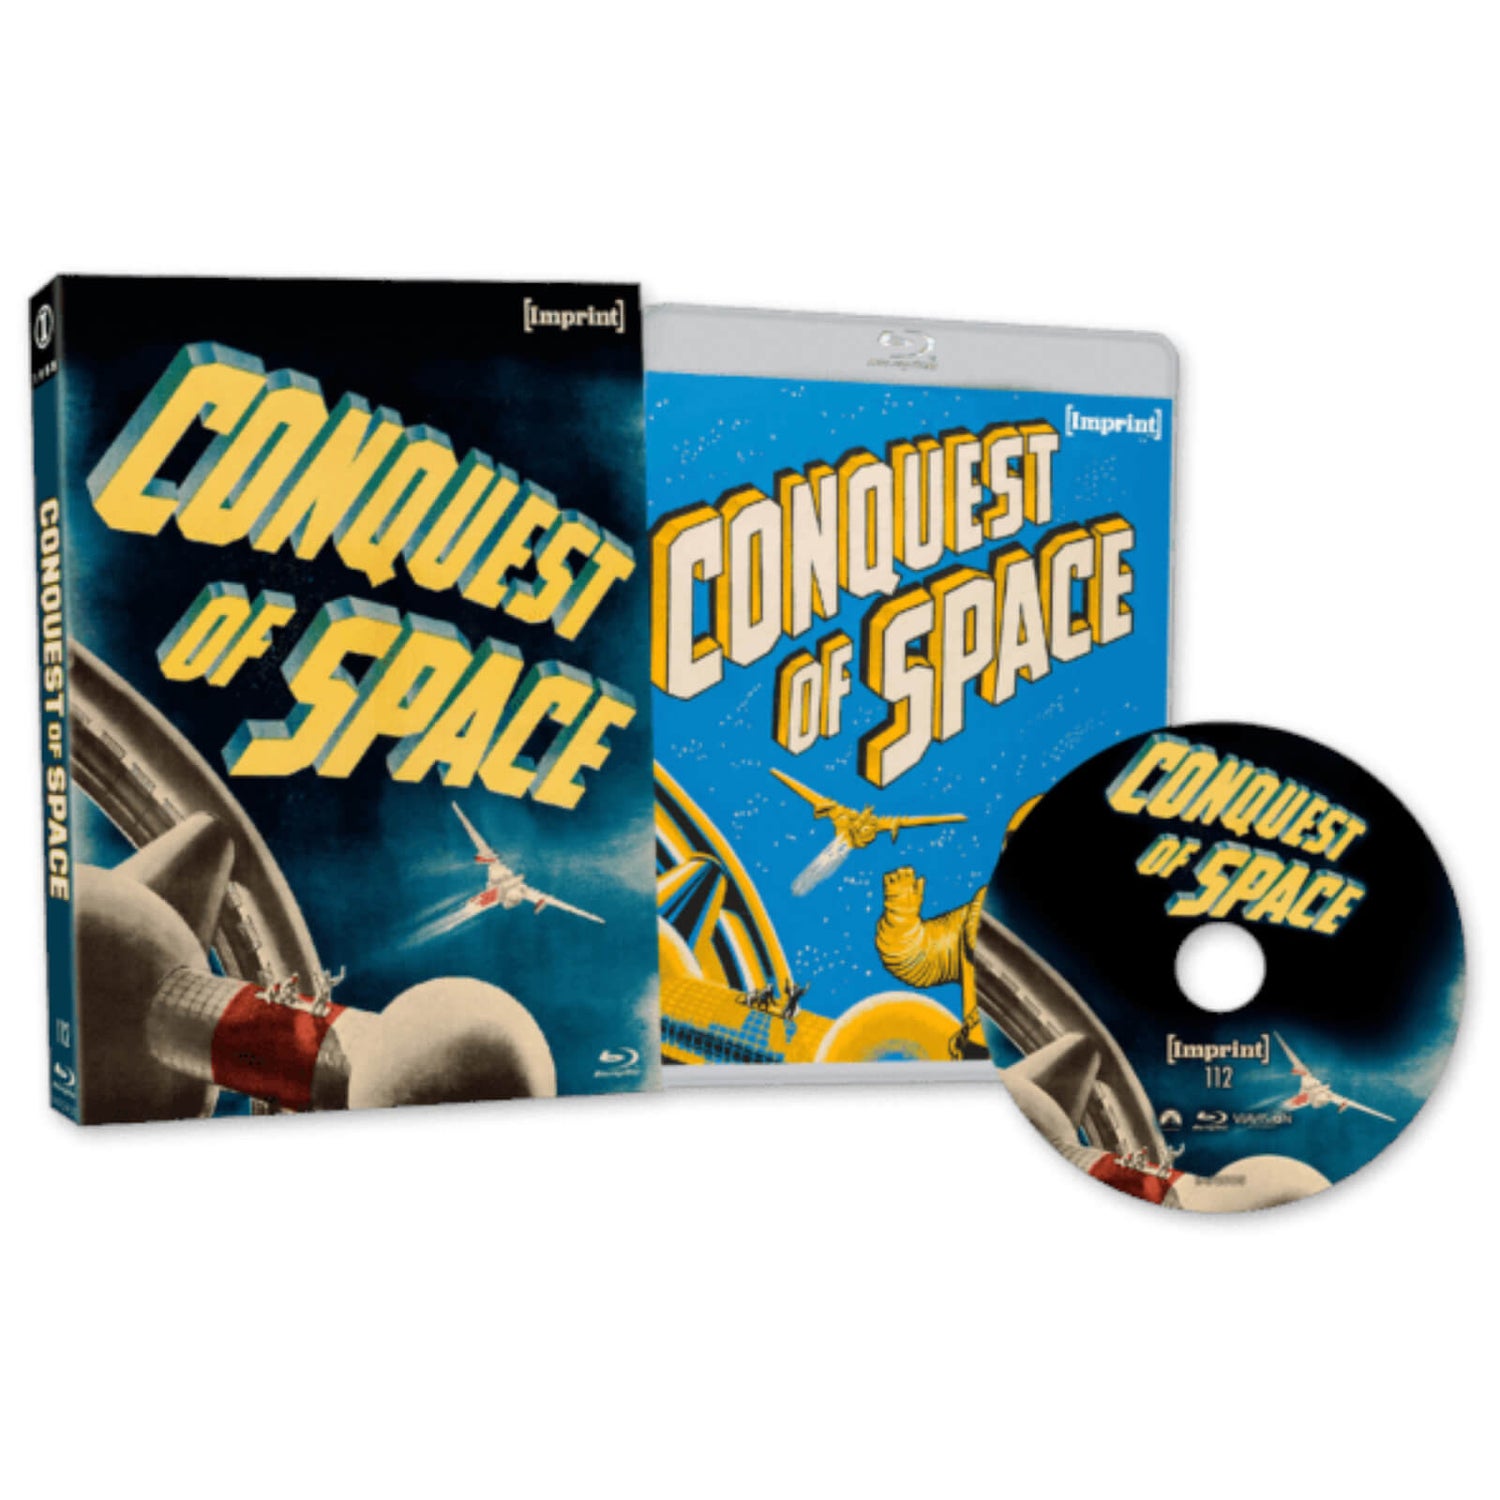 Conquest Of Space - Imprint Collection